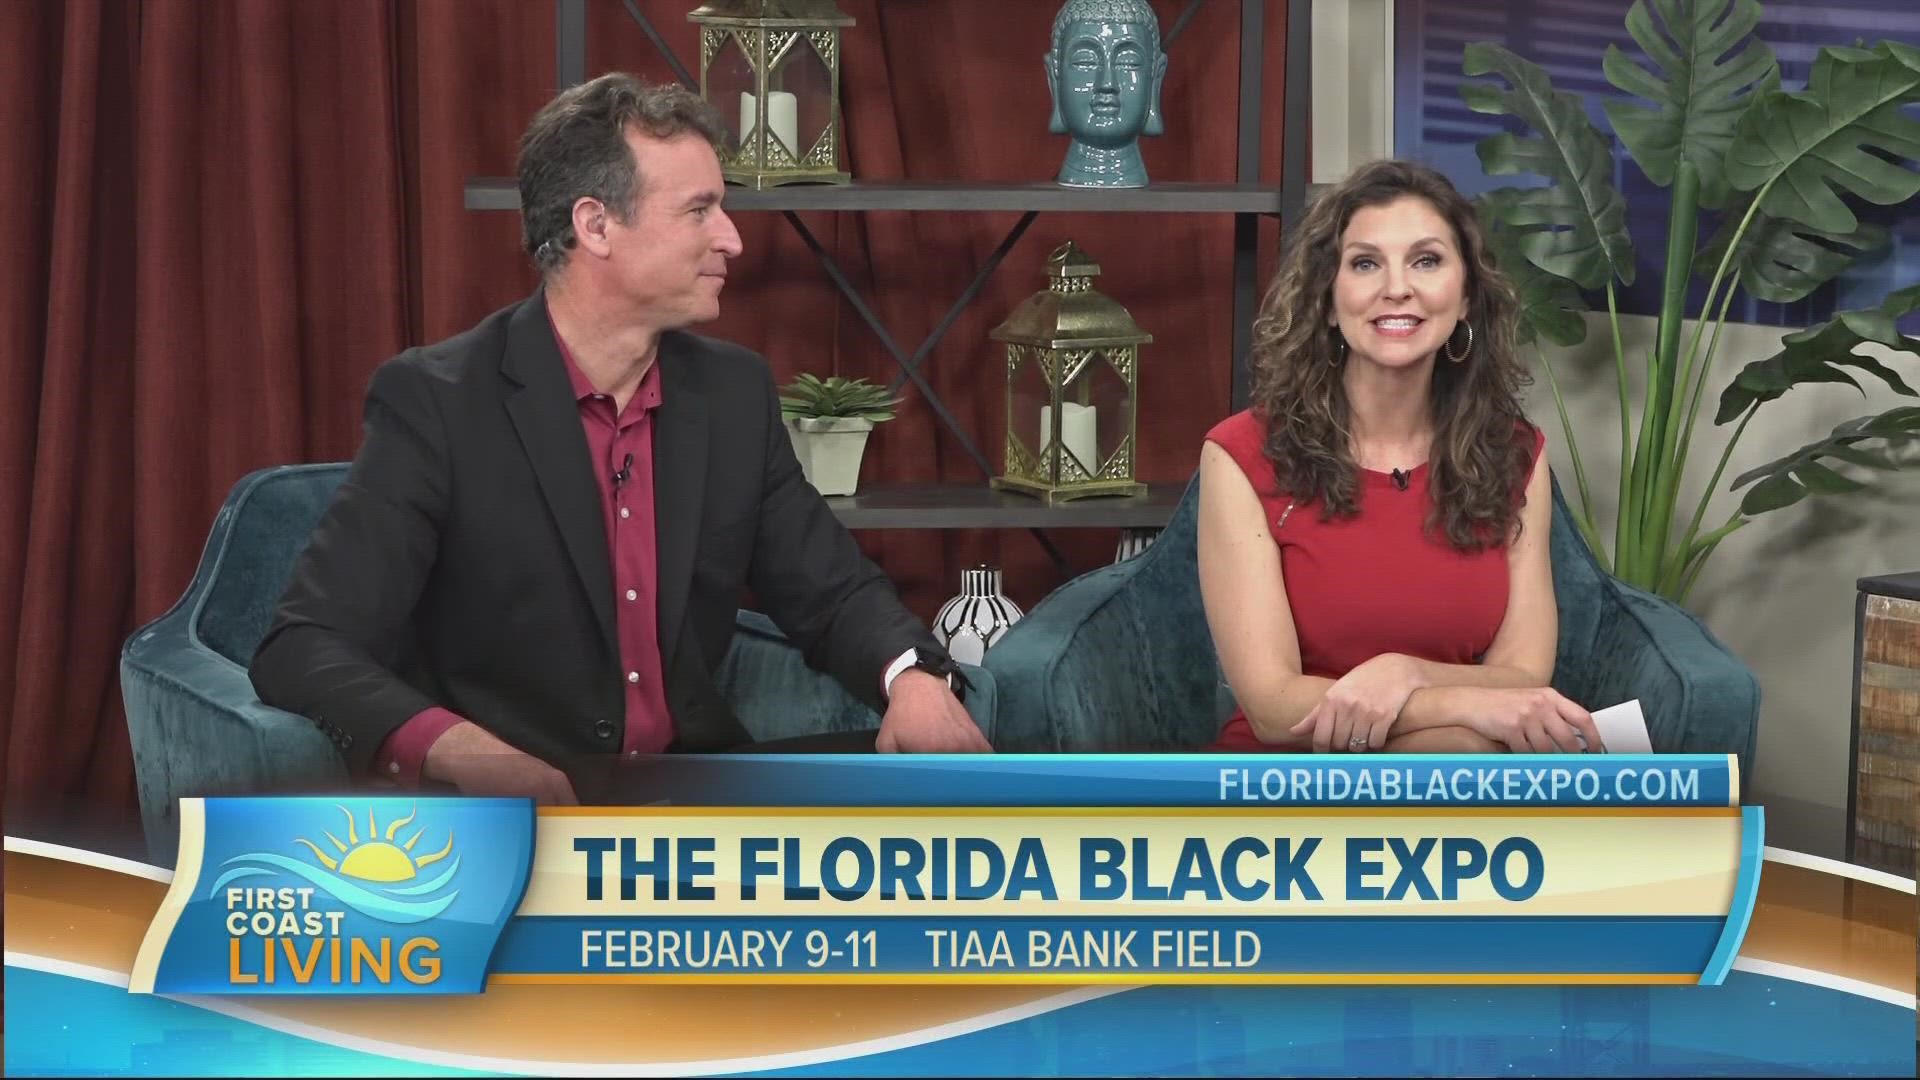 Black Excellence returns February 9-11, 2023 at TIAA Bank Field. The event is expected to be bigger and better than ever before!